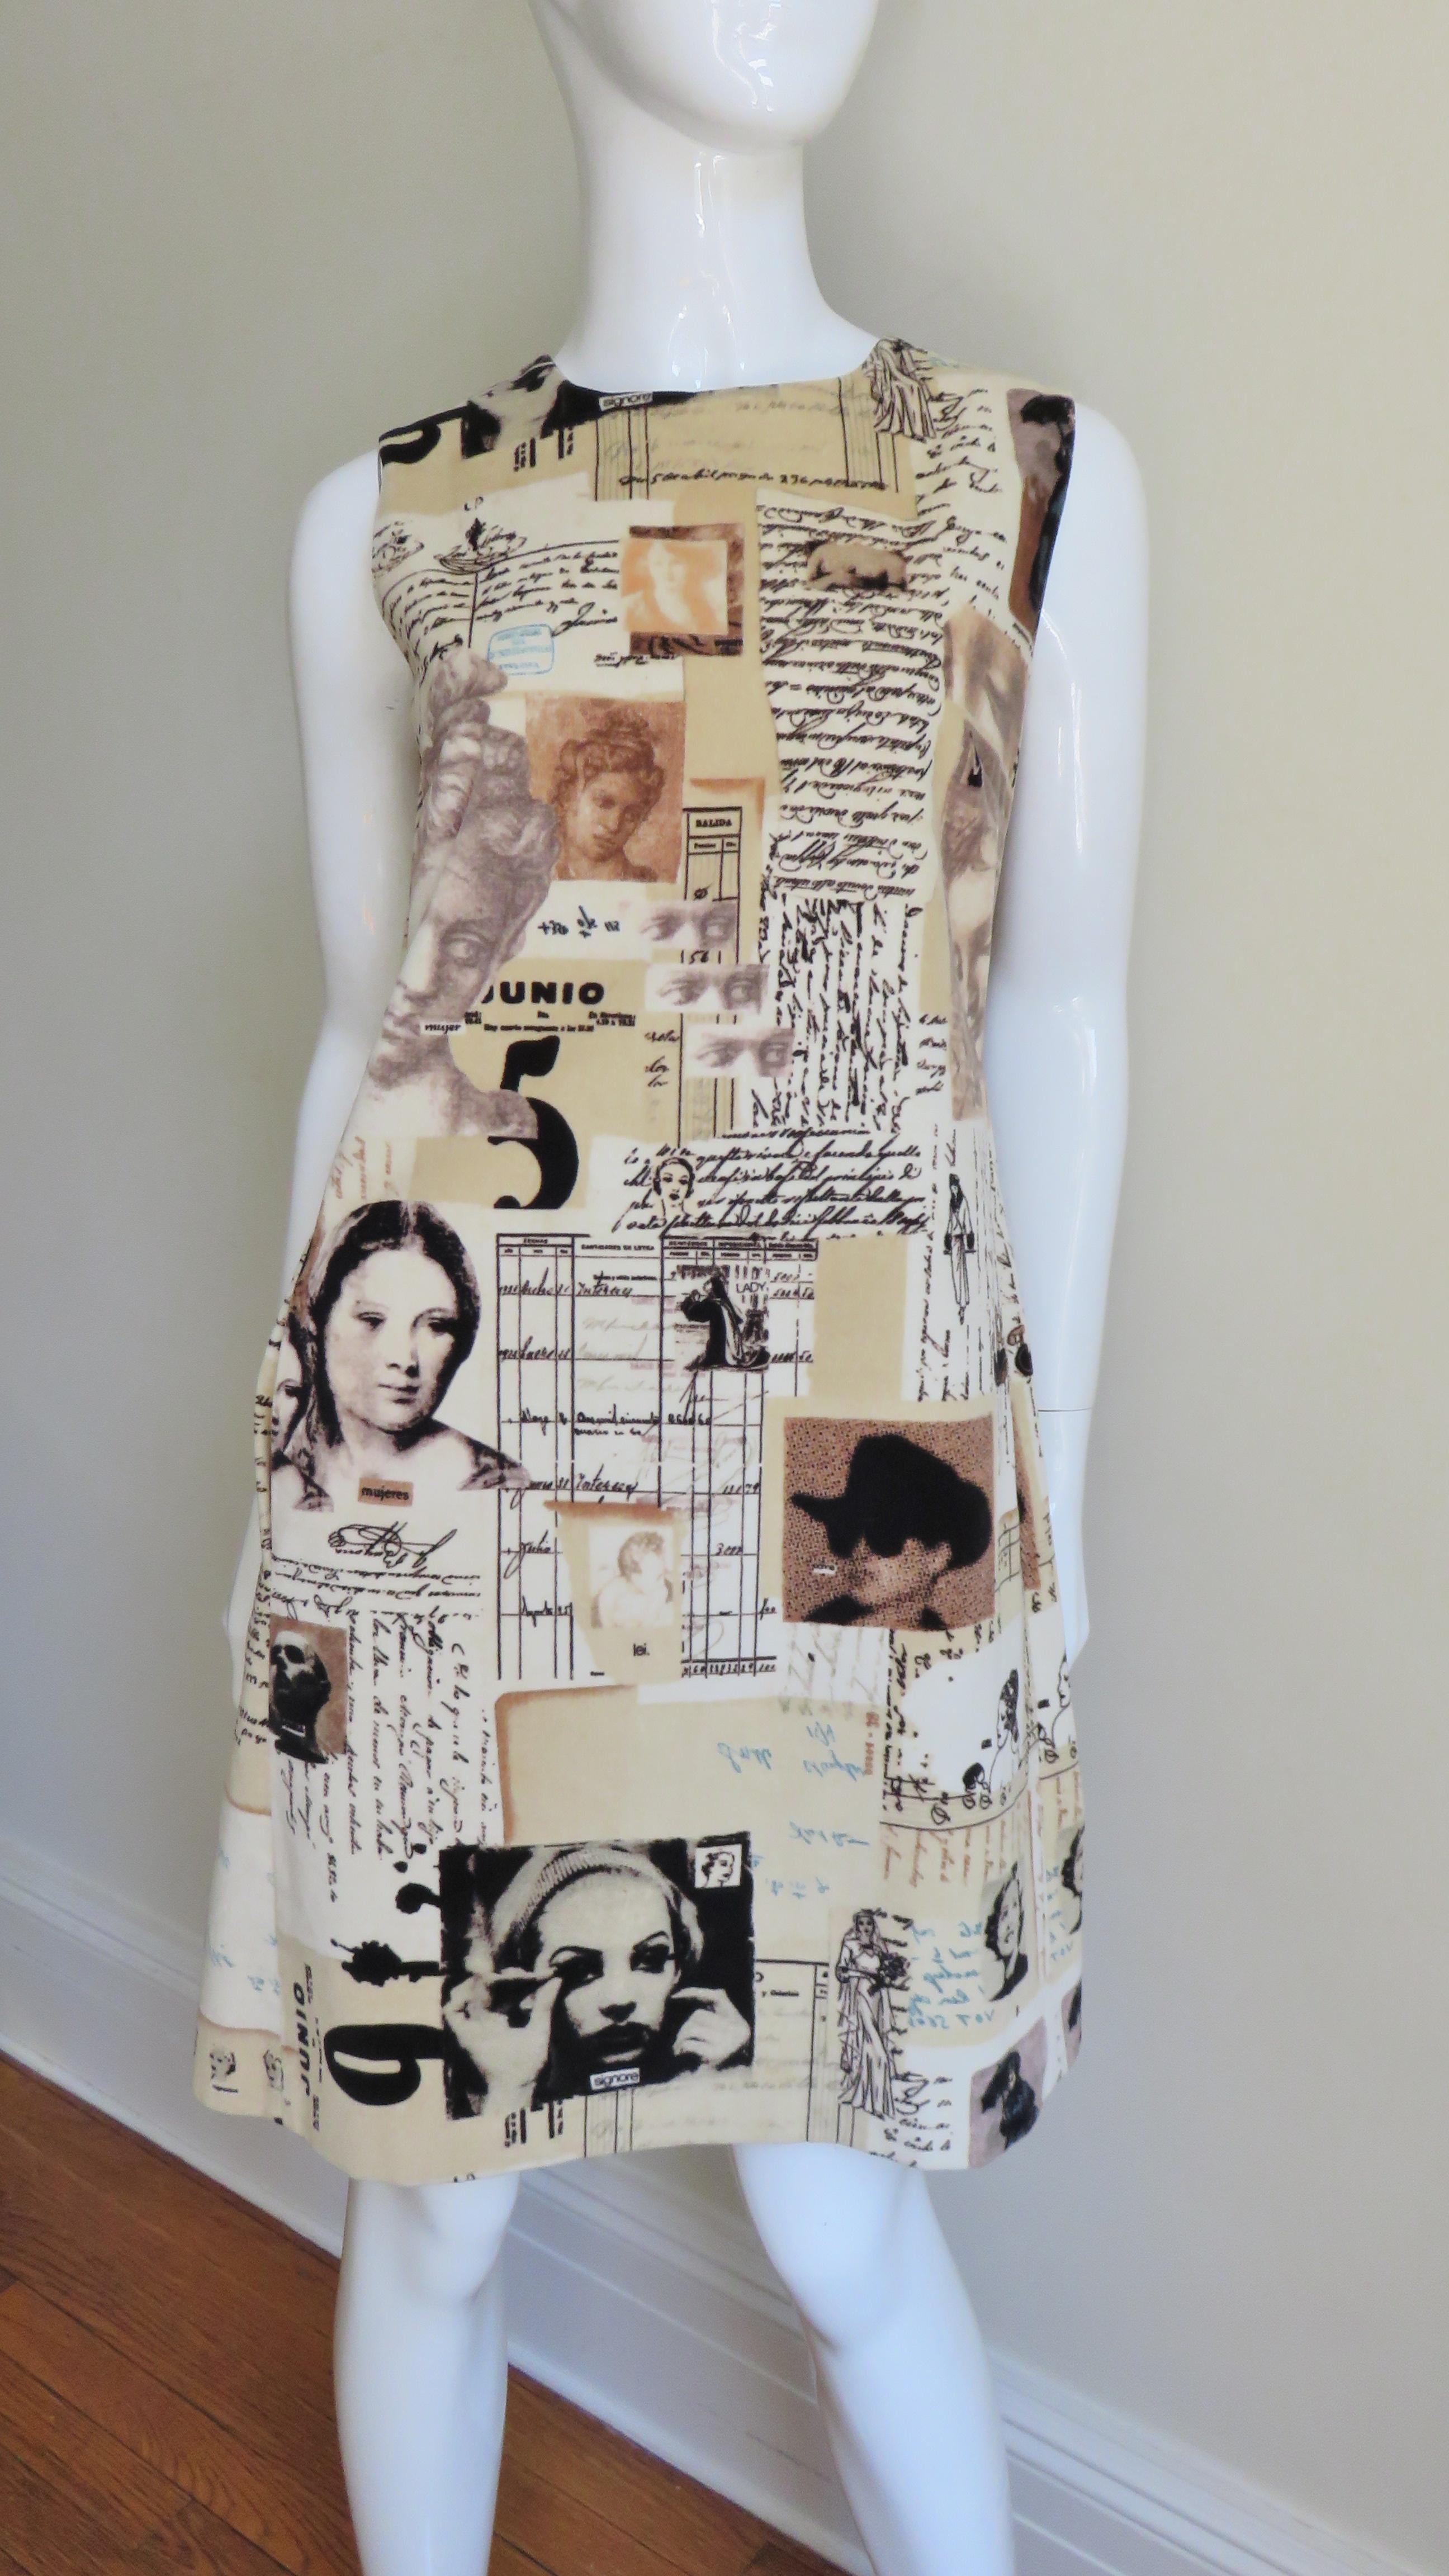 A velvet dress by Moschino with a bevy of patterns, prints and photos in shades of beige, brown, and black.  The print is amazingly detailed with photo prints of silent screen stars, works of art, writings, brides, nuns, numbers etc..  It is a